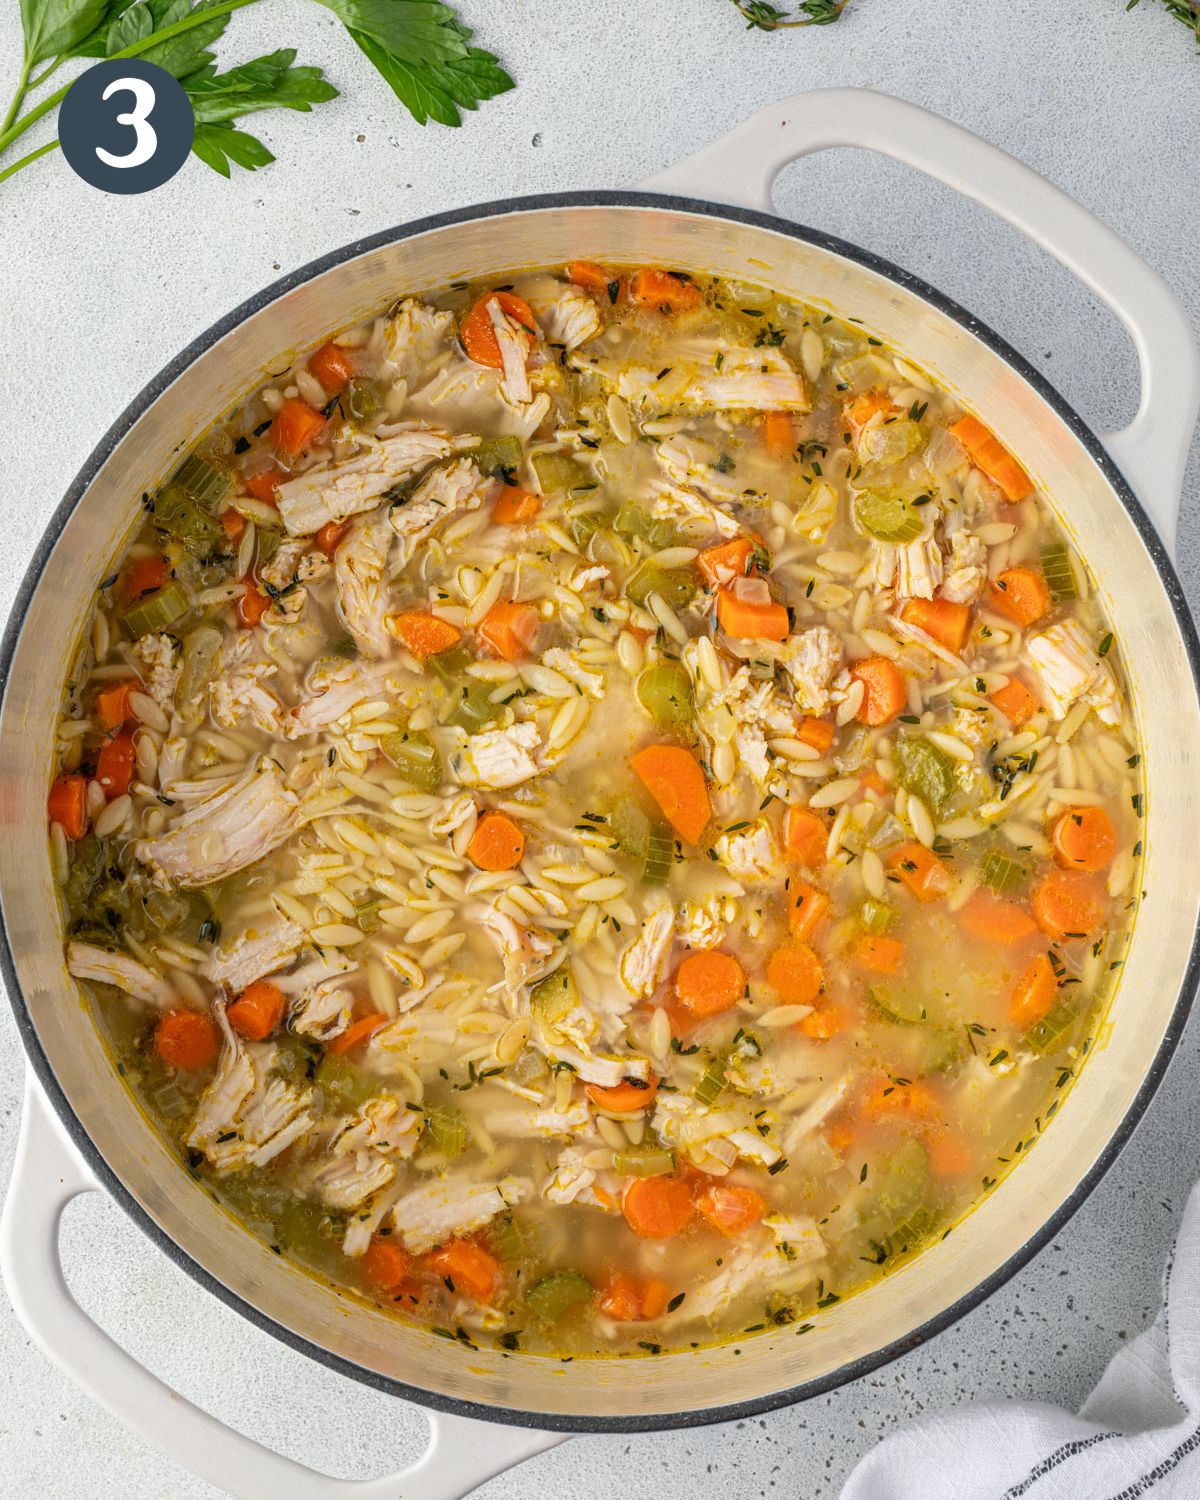 A pot of turkey orzo soup just before serving.